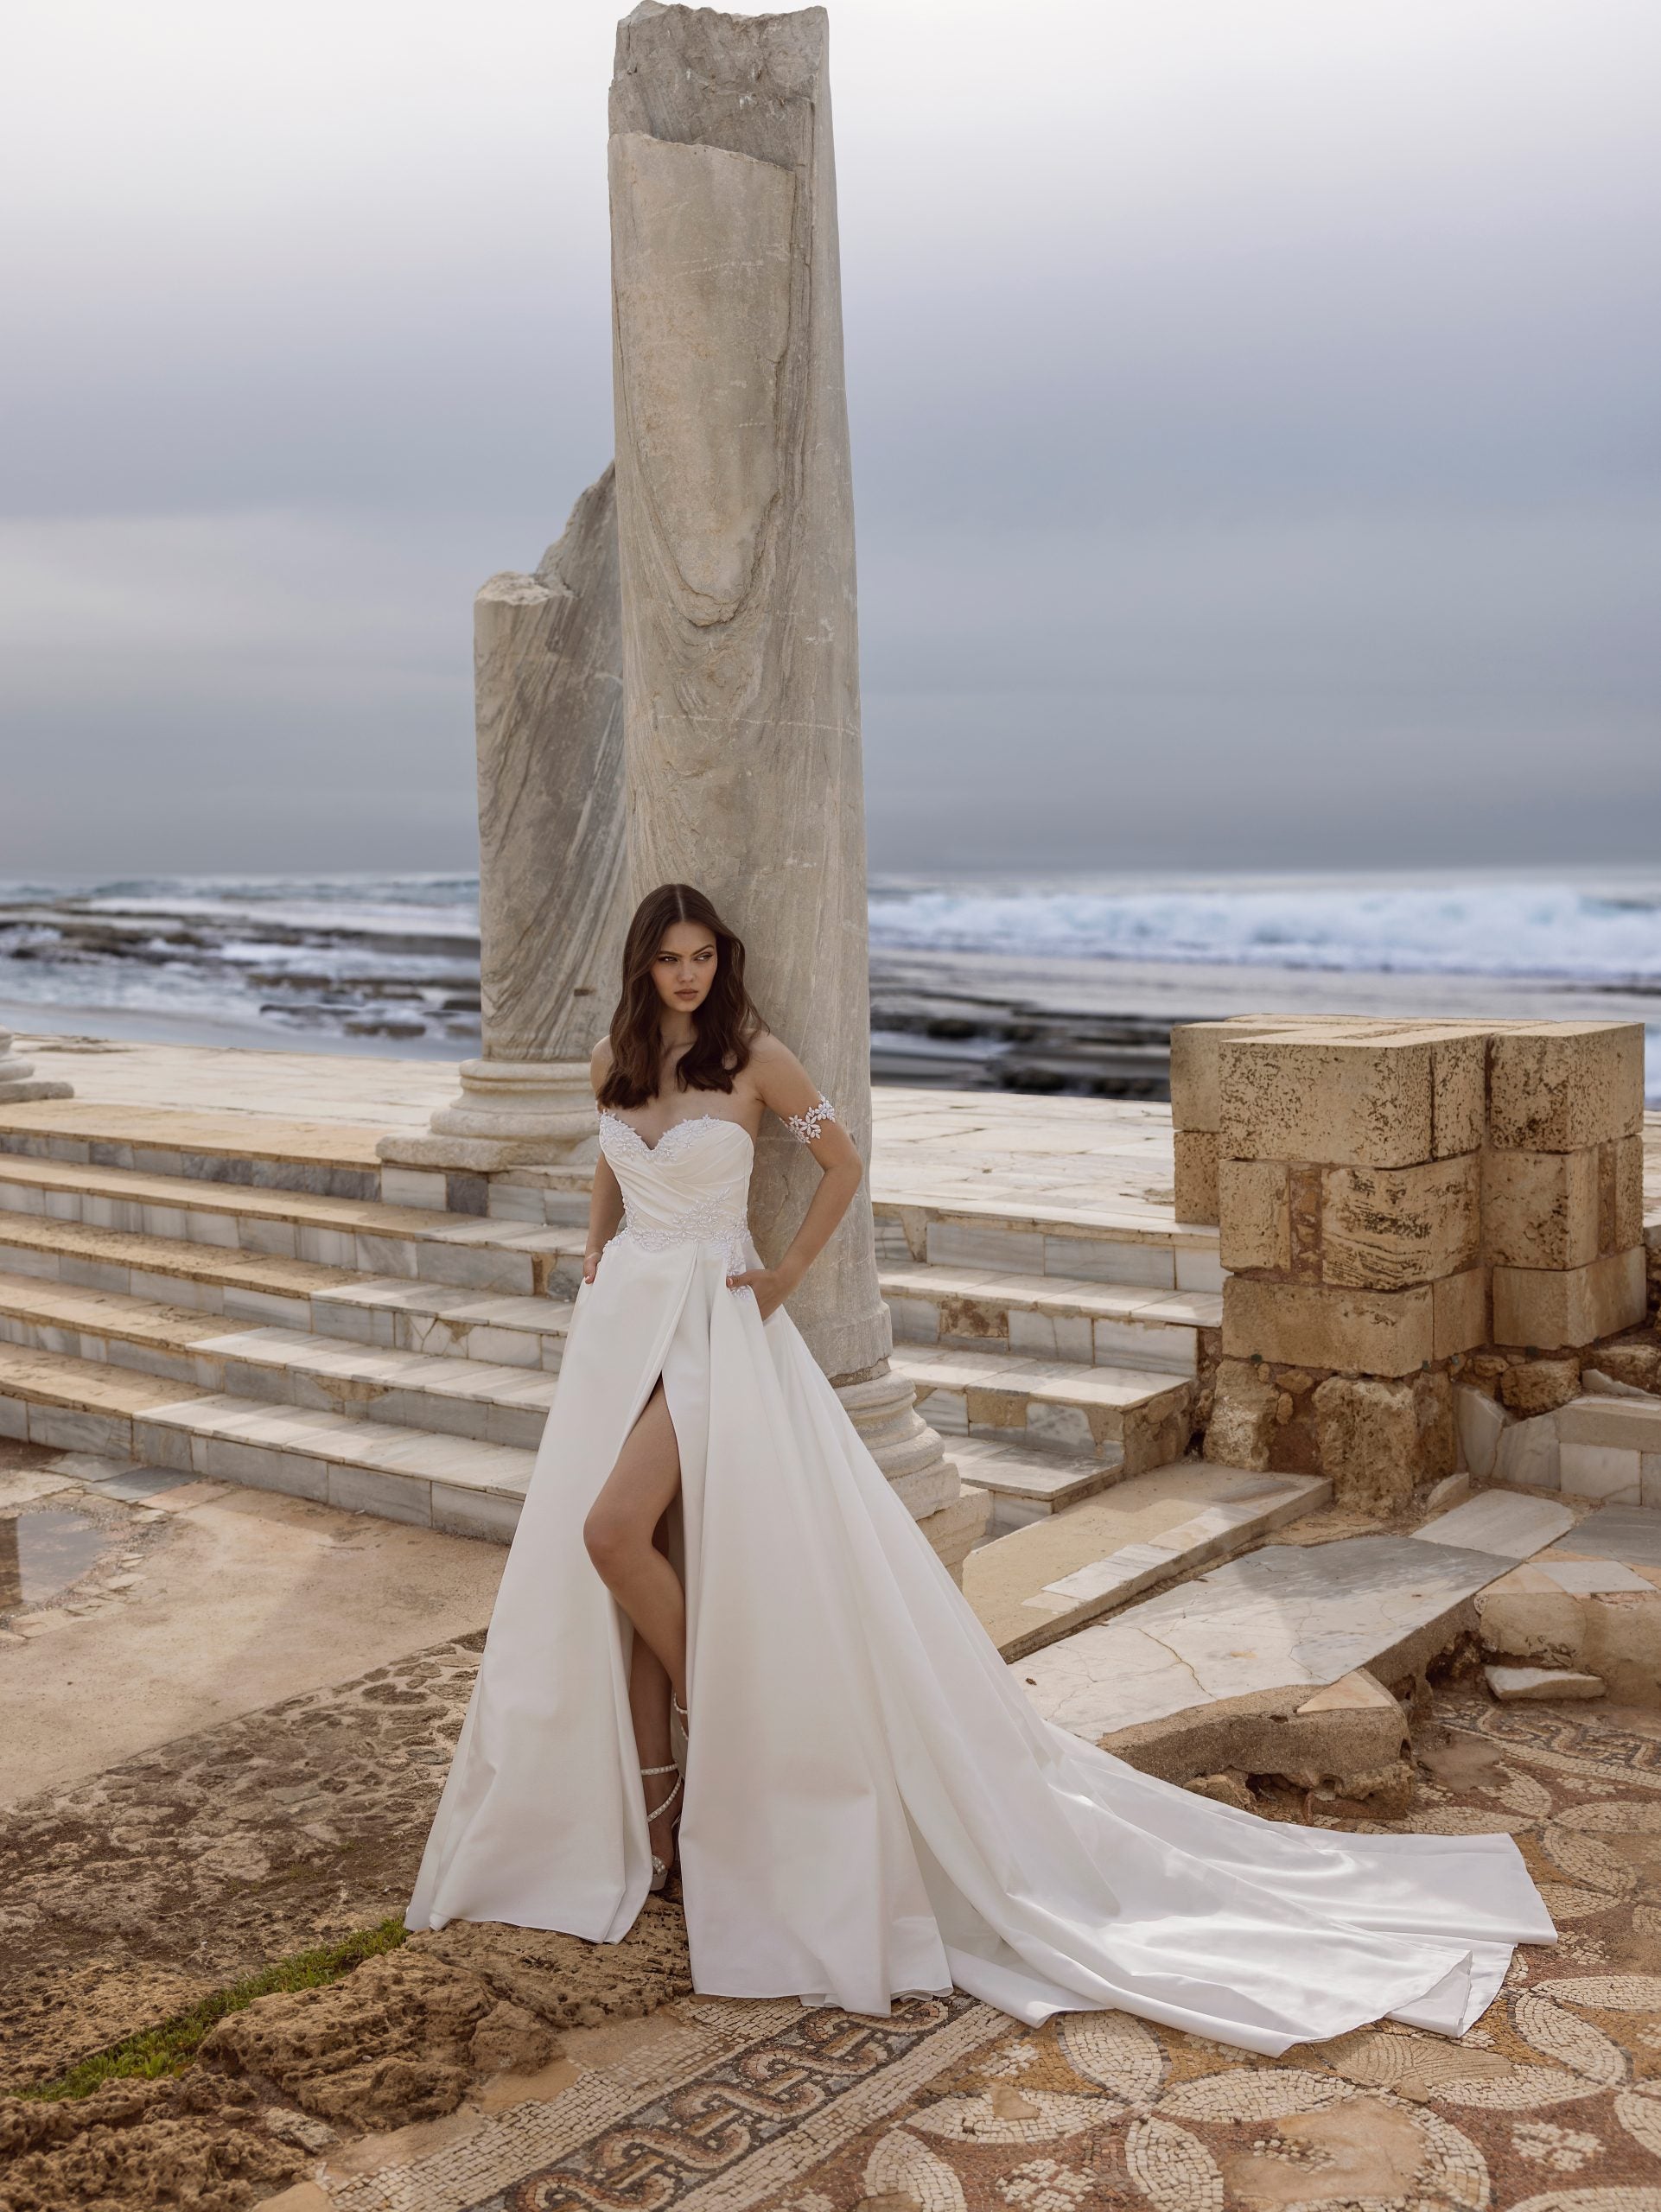 Strapless Ball Gown Wedding Dress With Swetheart Neckline by Love by Pnina Tornai - Image 1